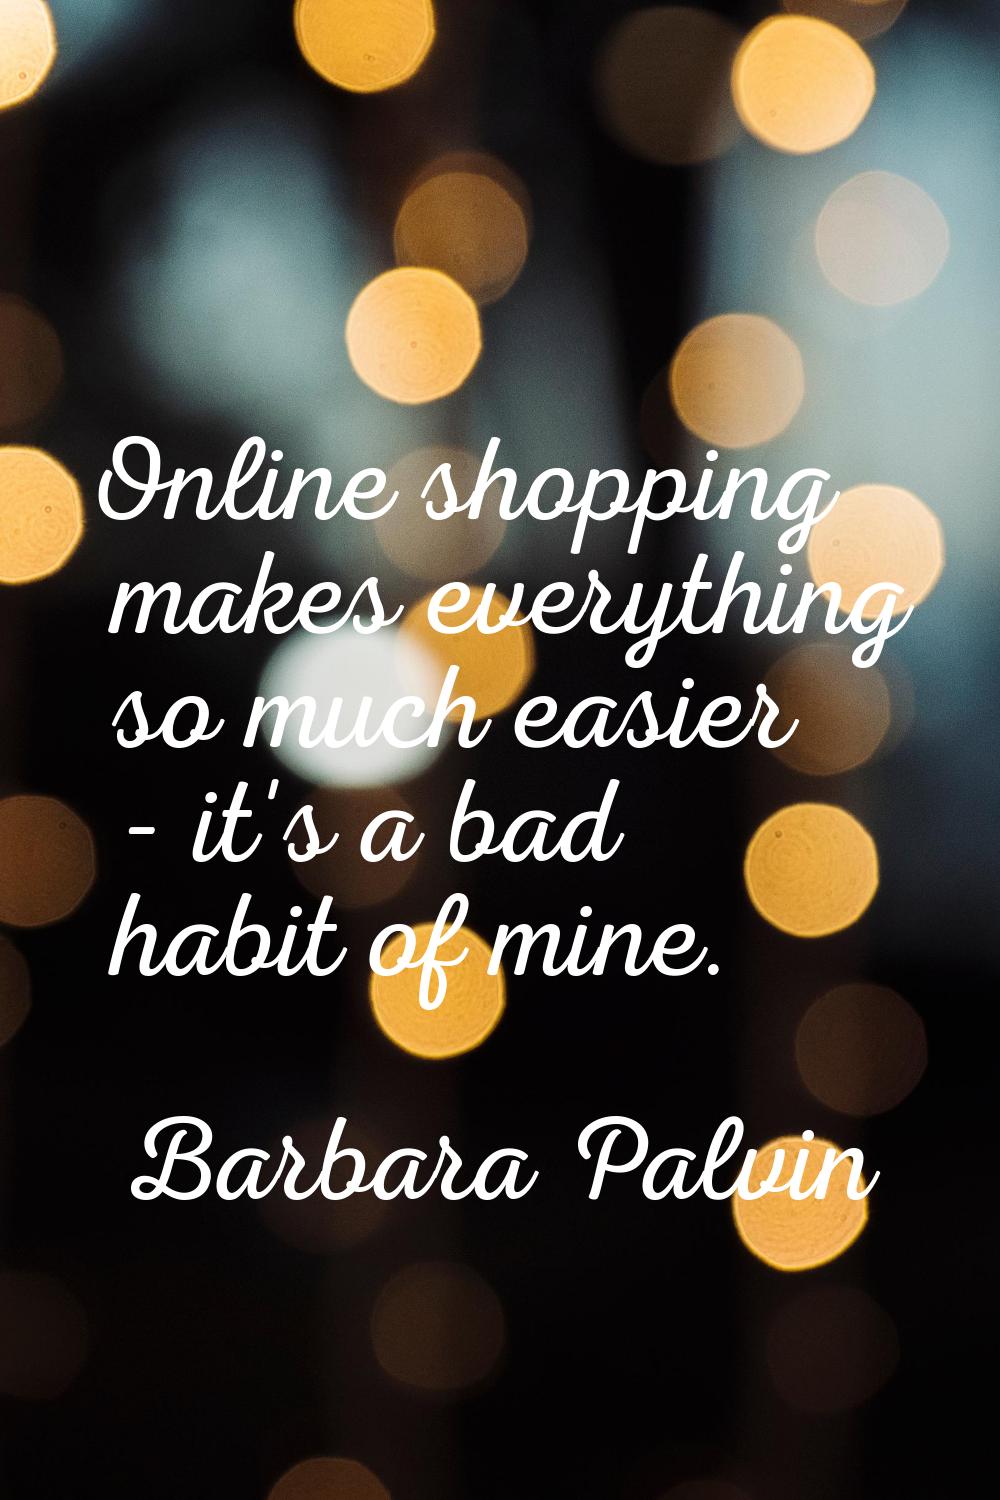 Online shopping makes everything so much easier - it's a bad habit of mine.